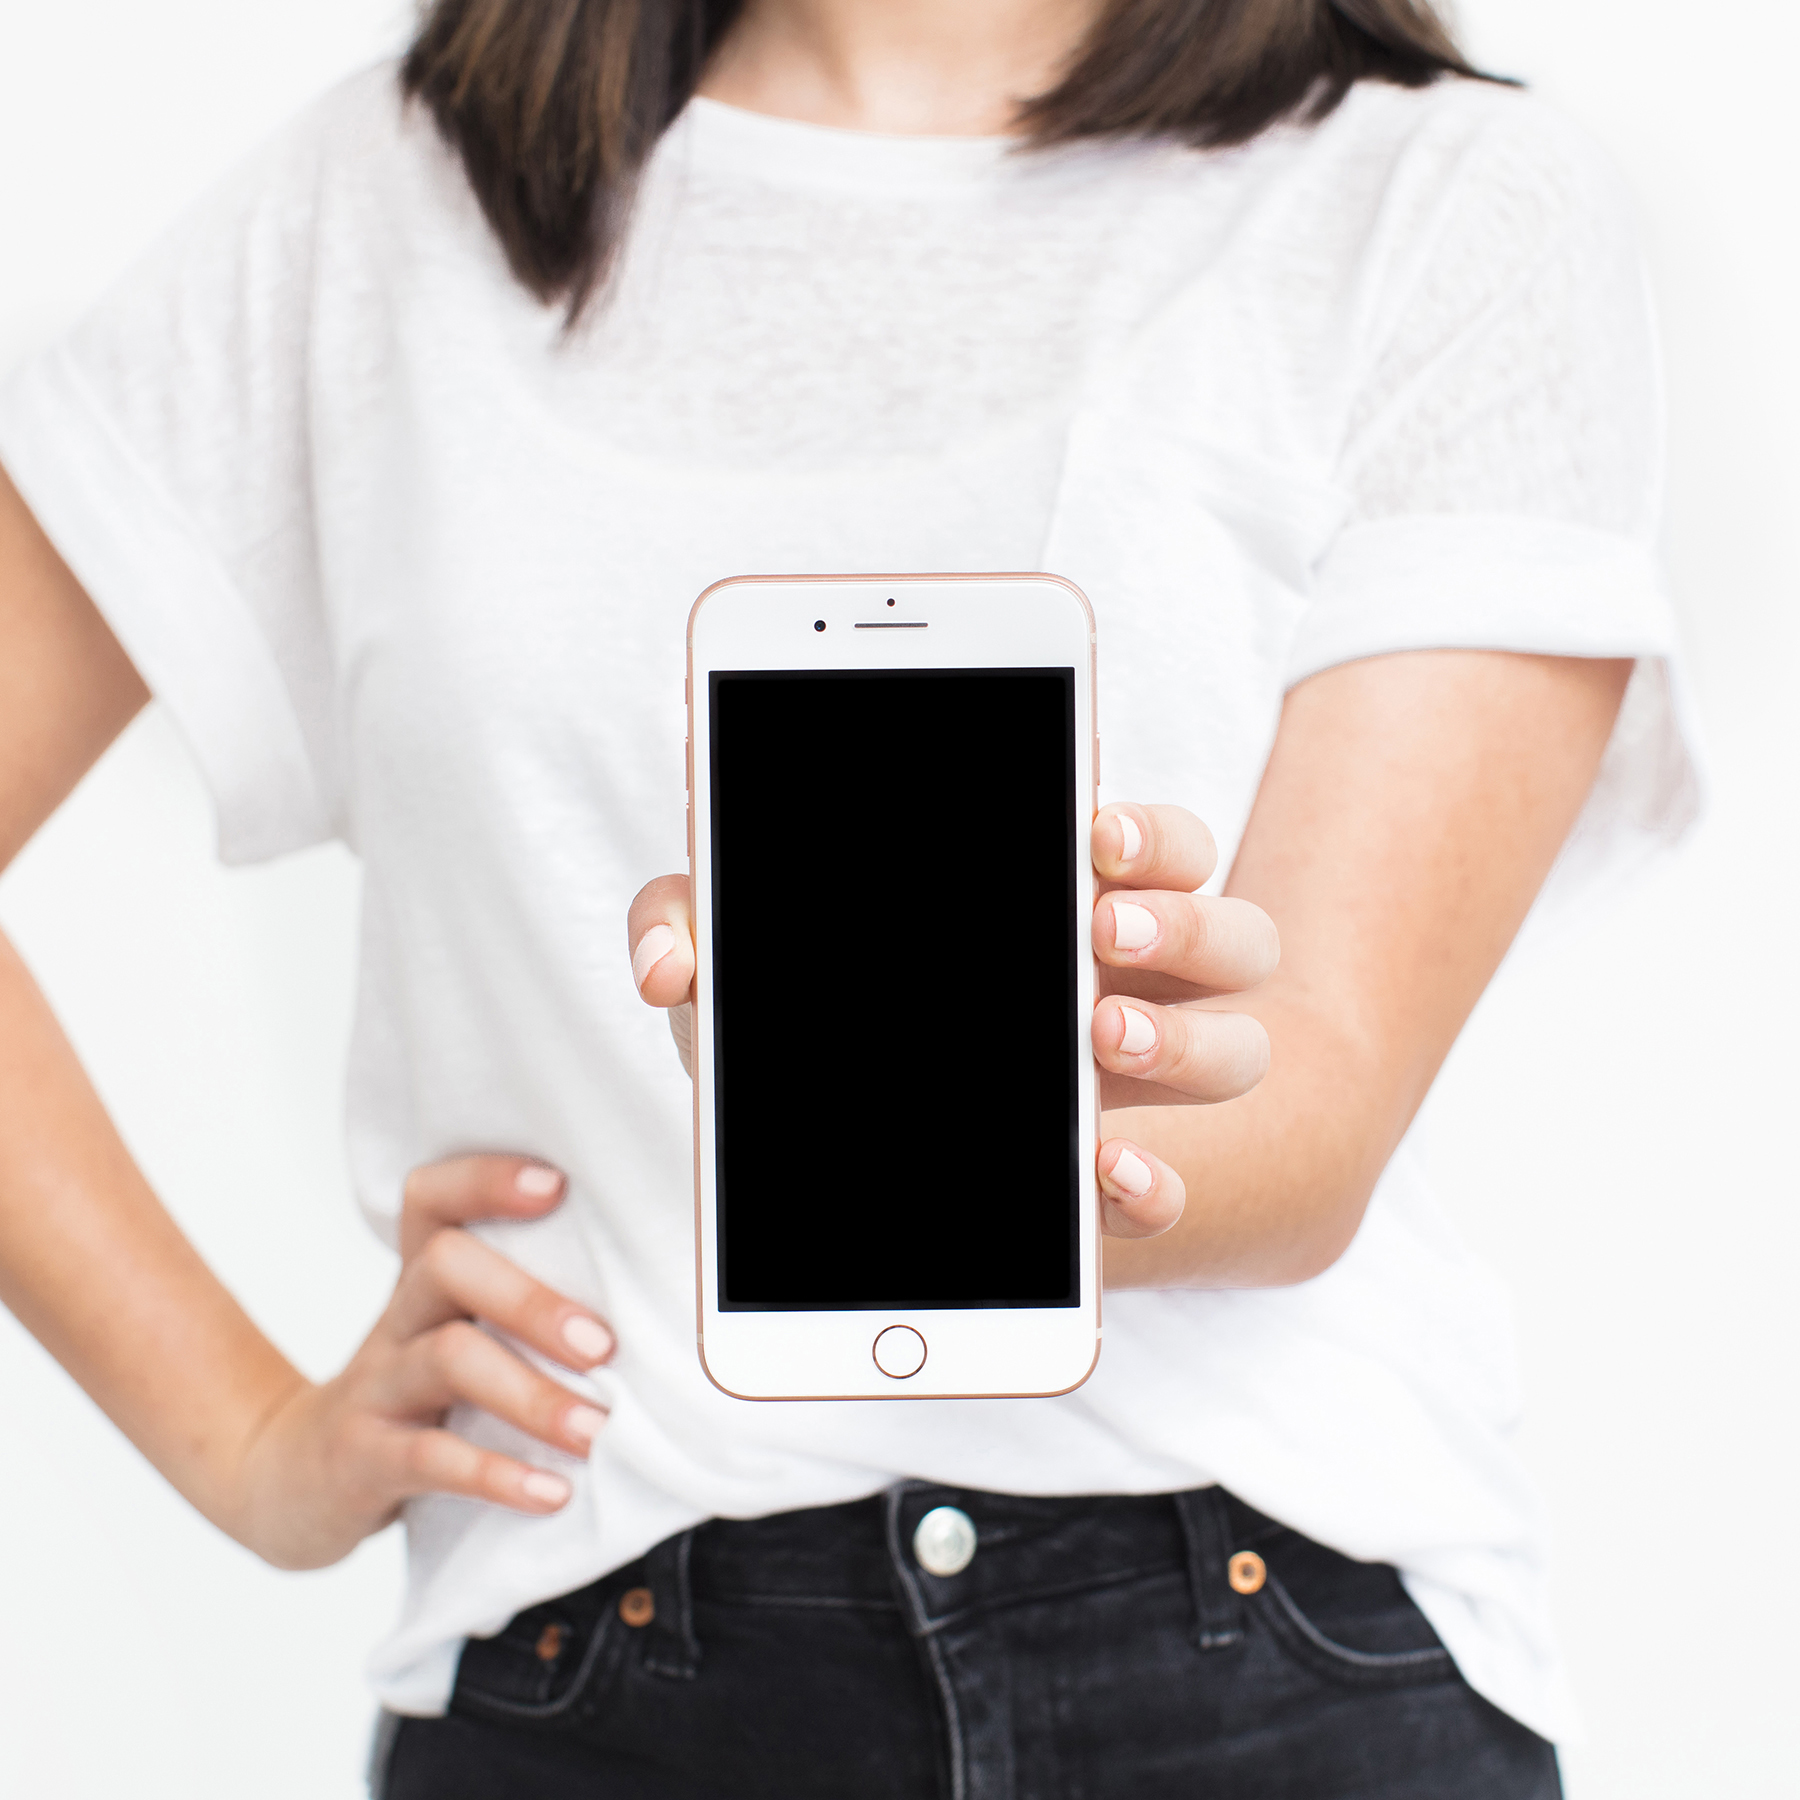 A woman holding out a mobile phone to demonstrate her newly launched digital product